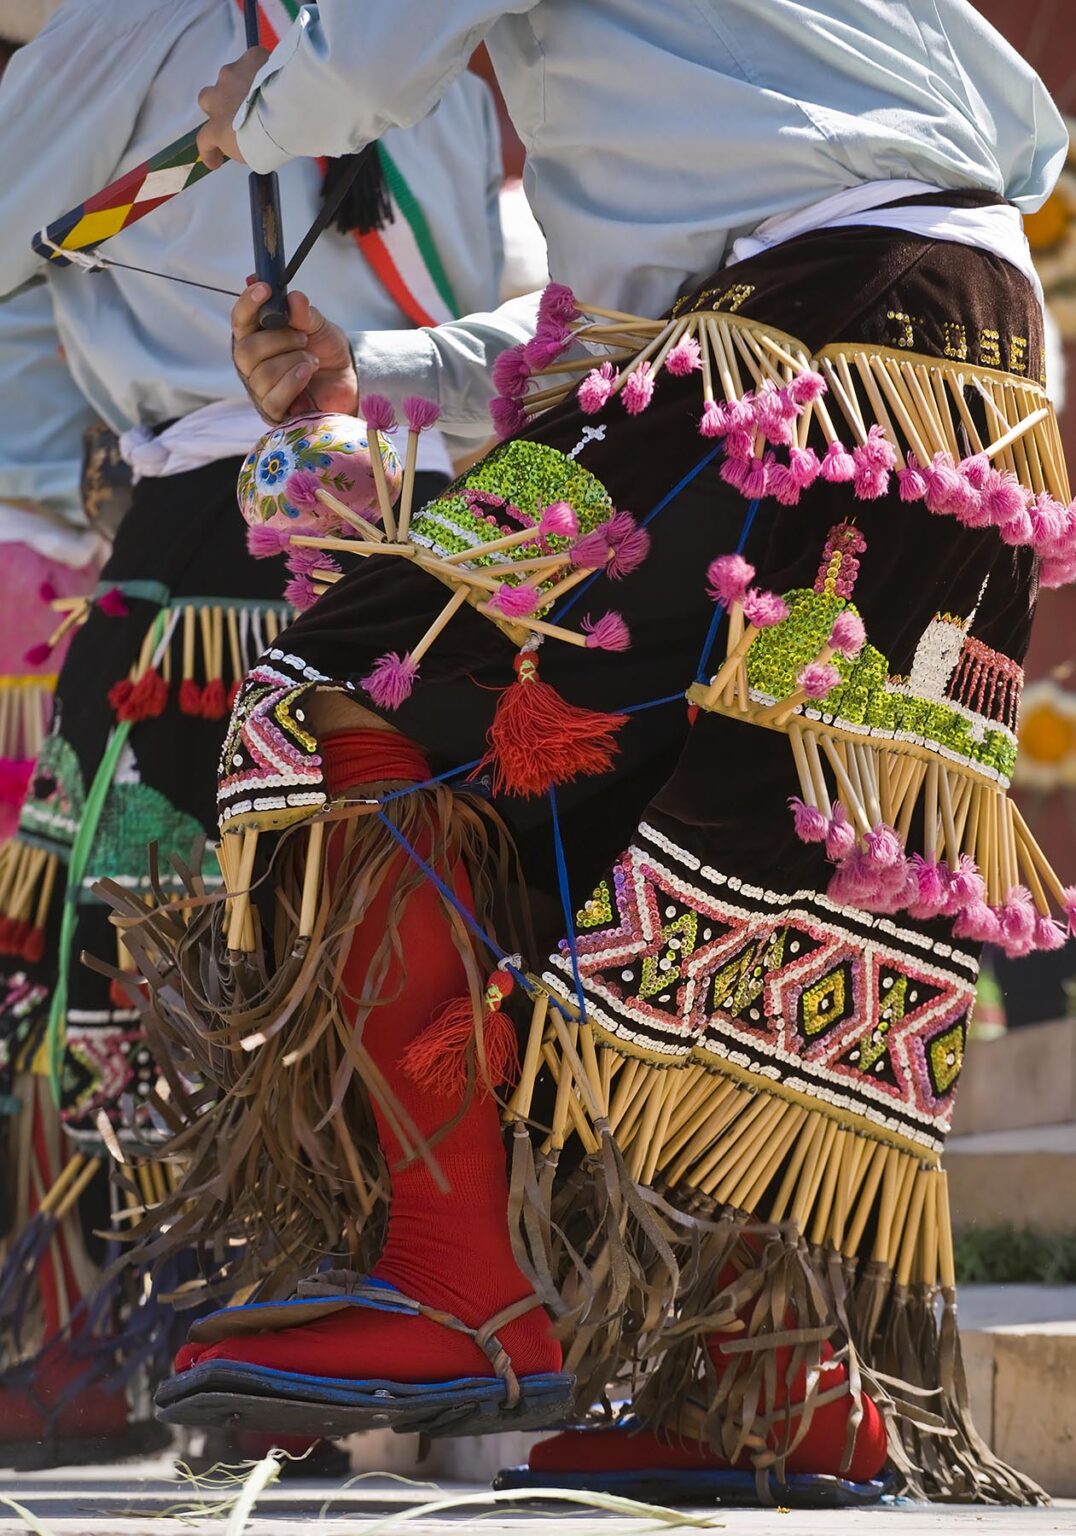 Dance troops come from all parts of Mexico representing their region in the annual INDEPENDENCE DAY PARADE in September - SAN MIGUEL DE ALLENDE, MEXICO